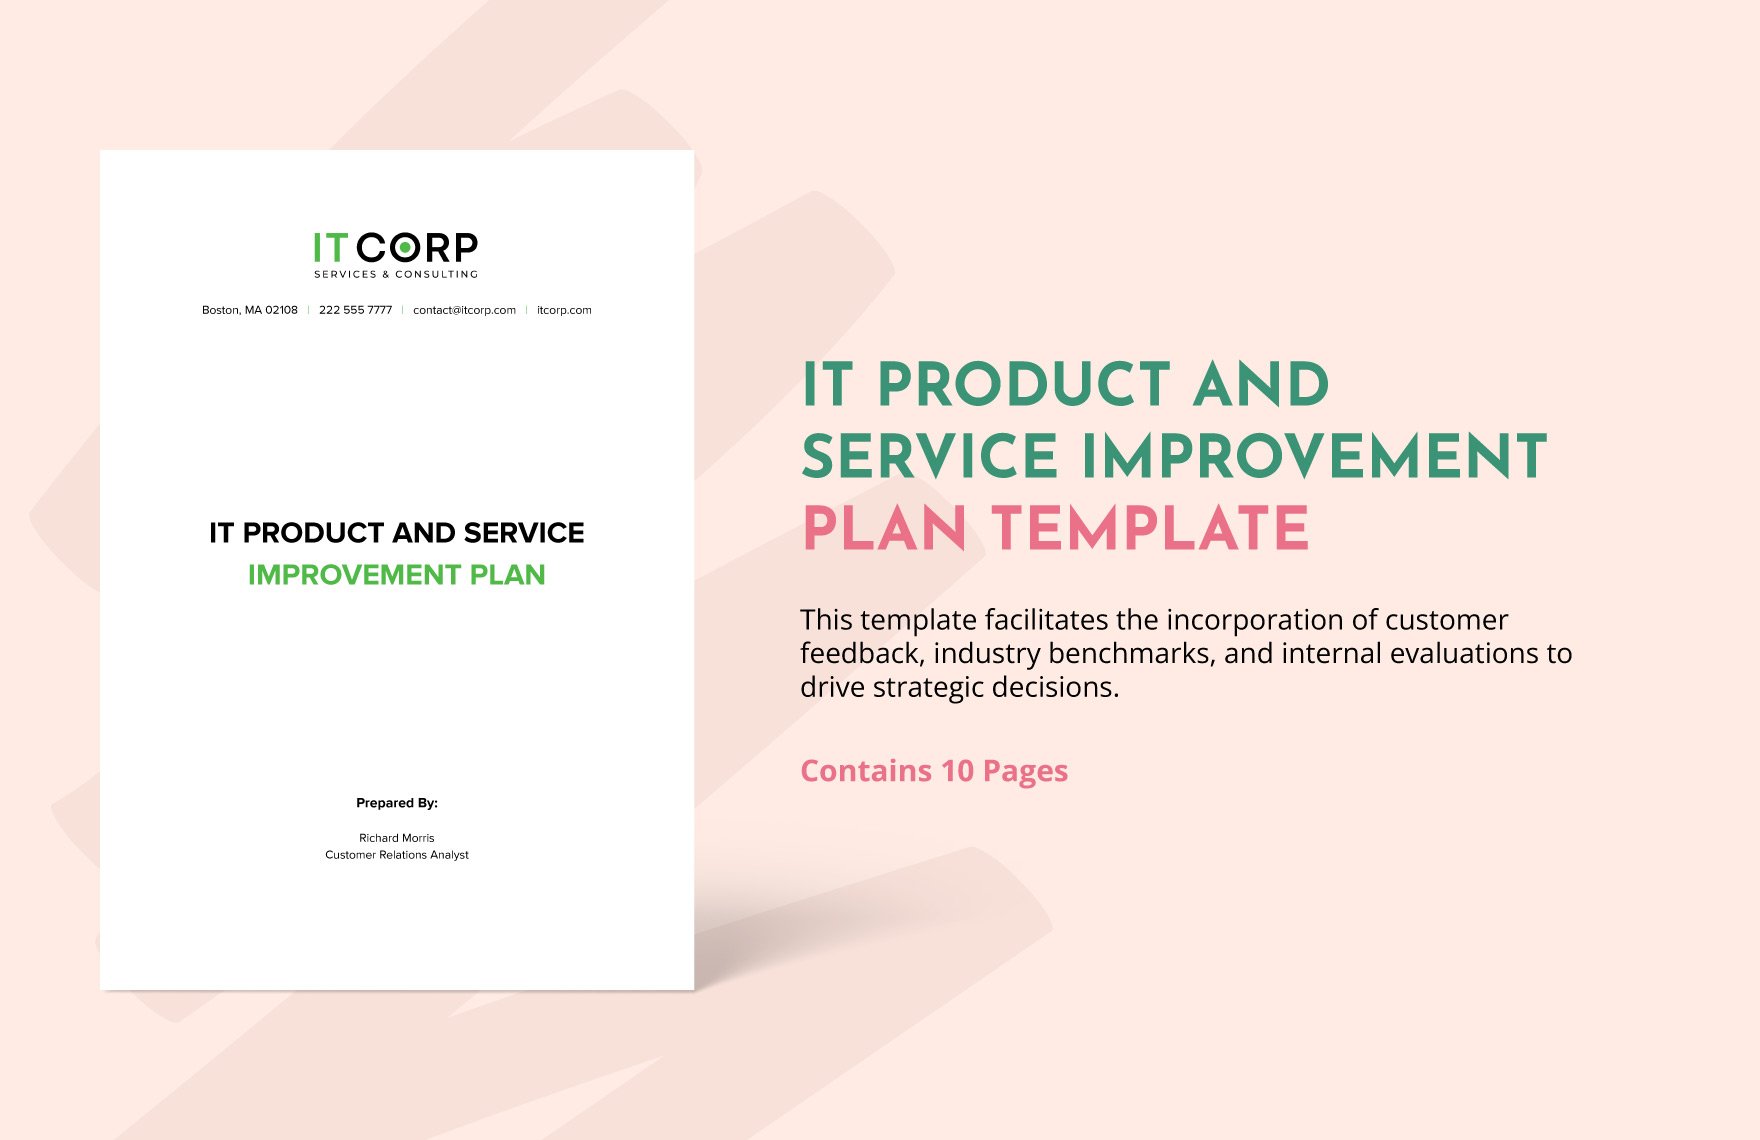 IT Product and Service Improvement Plan Template